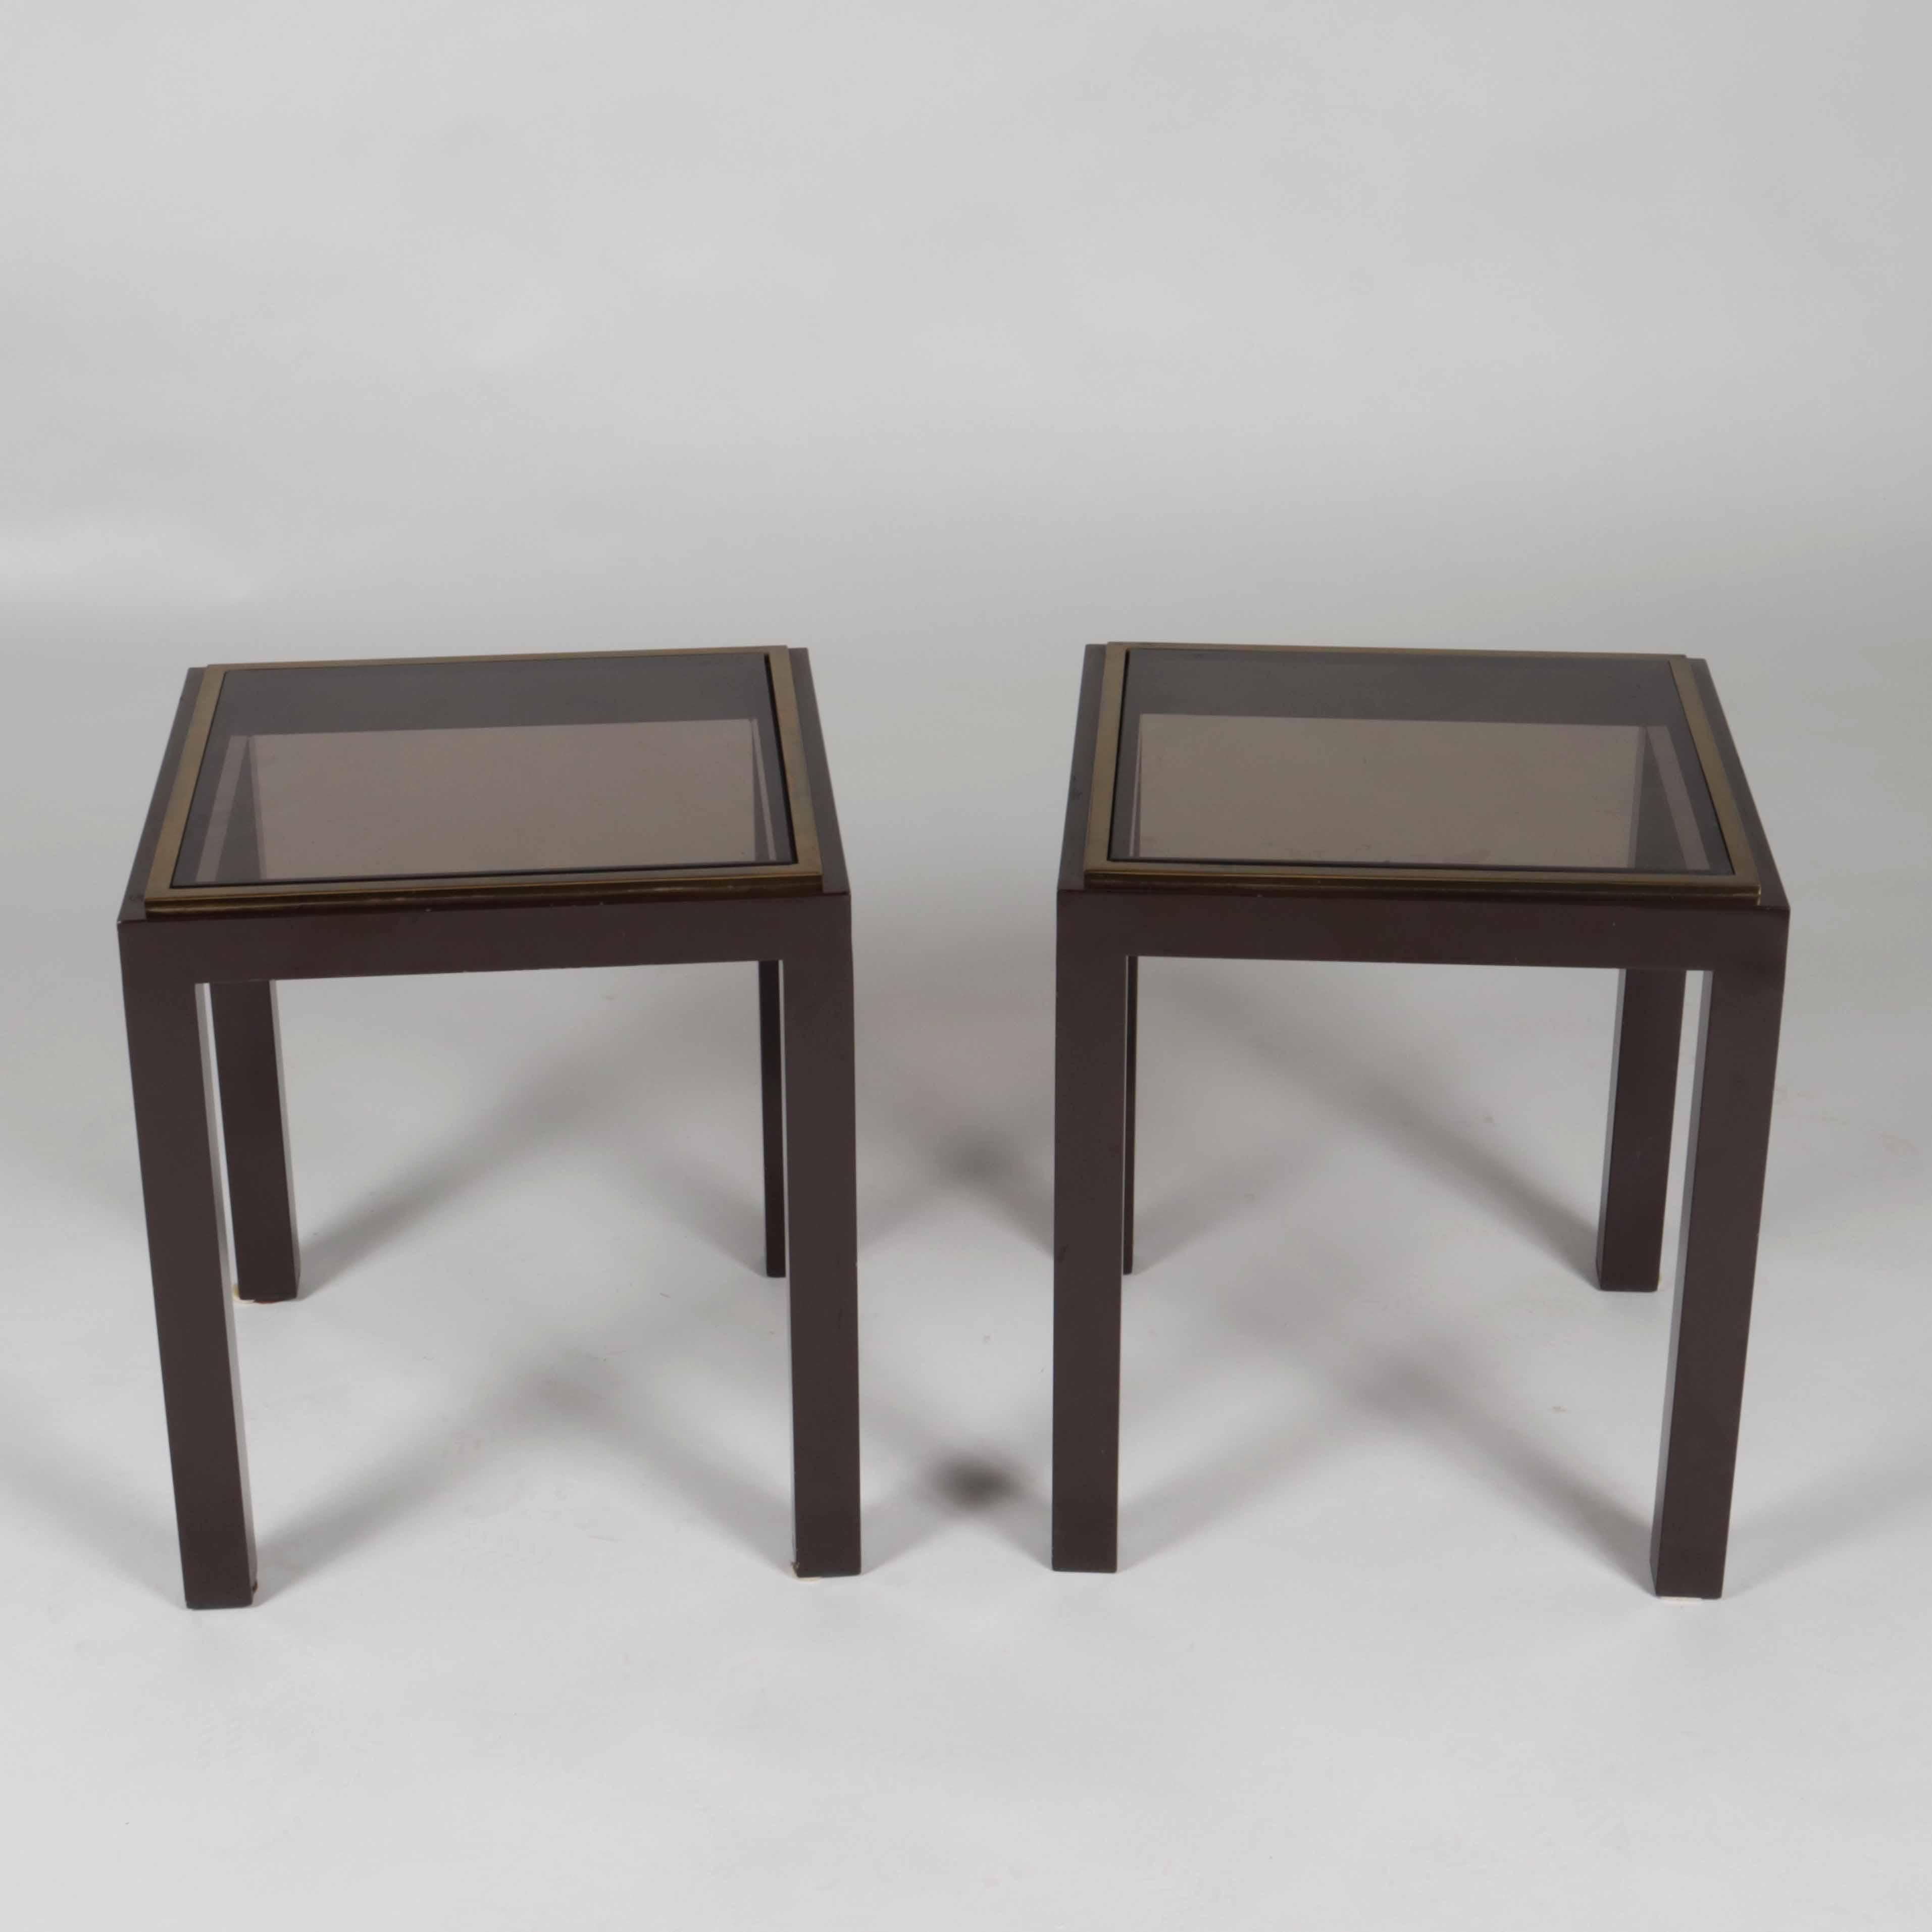 Pair of bronze side tables, c. 1960.